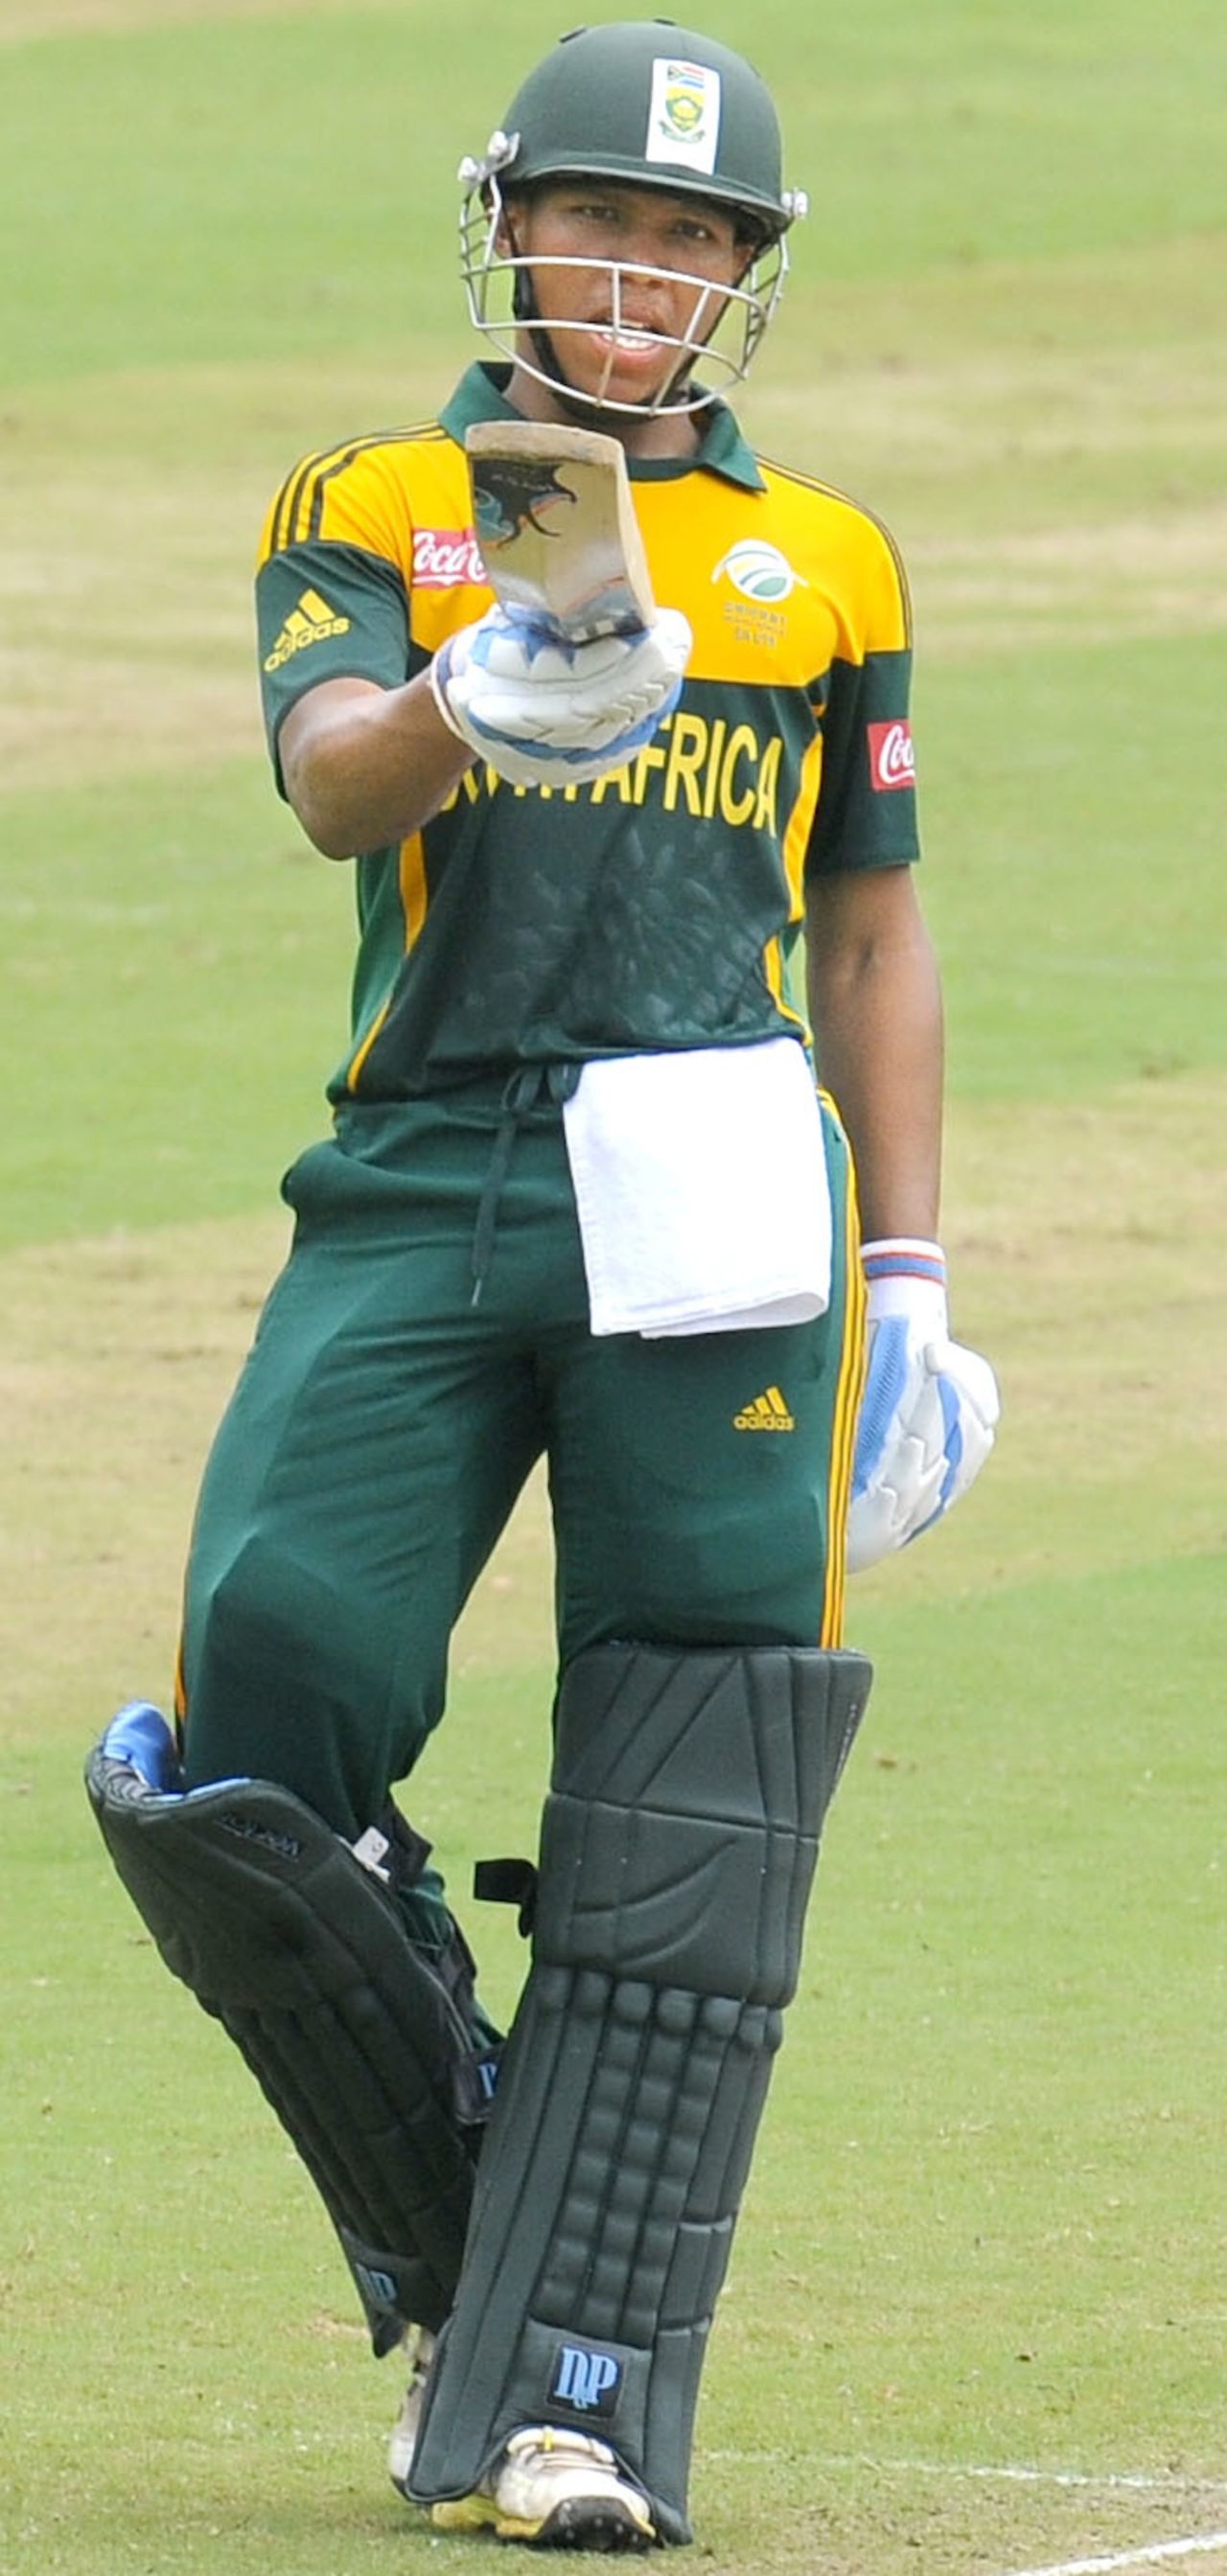 Clyde Fortuin top-scored with 65, India Under-19s v South Africa Under-19s, Visakhapatnam, October 1, 2013 